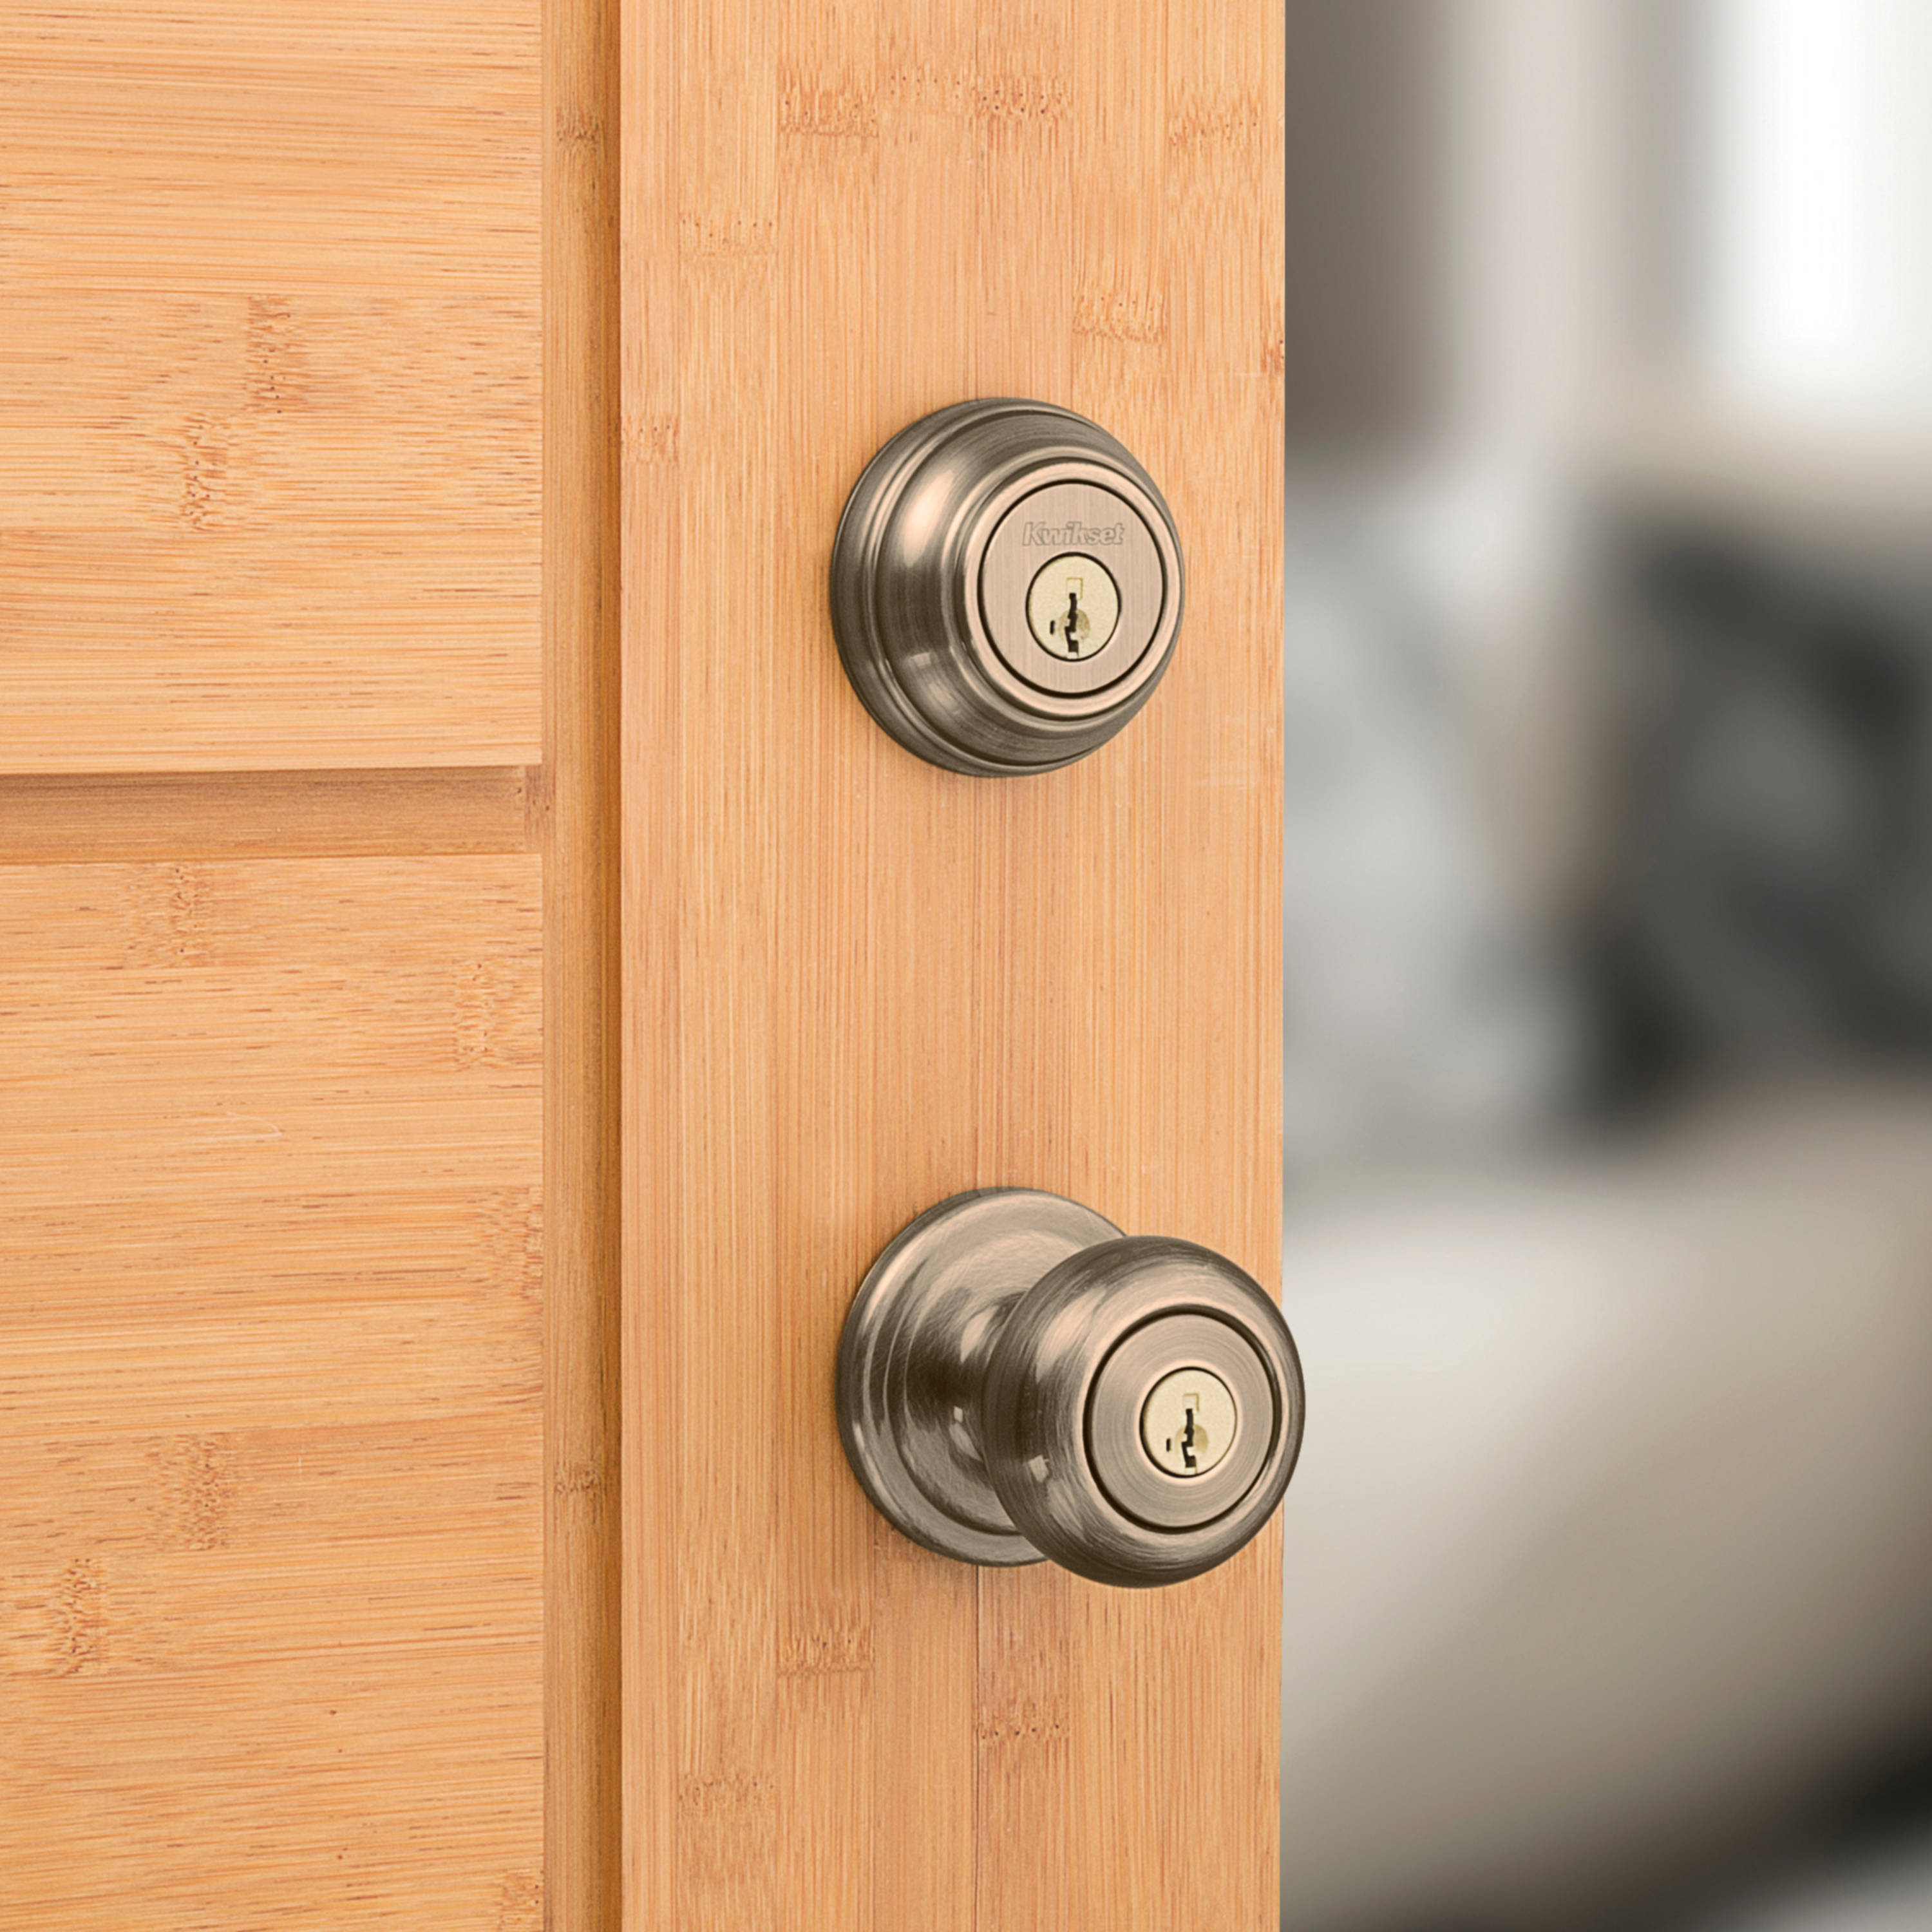 Kwikset Signature Series Signatures Juno Antique Brass Smartkey Exterior  Single-cylinder deadbolt Keyed Entry Door Knob Combo Pack with  Antimicrobial Technology in the Door Knobs department at